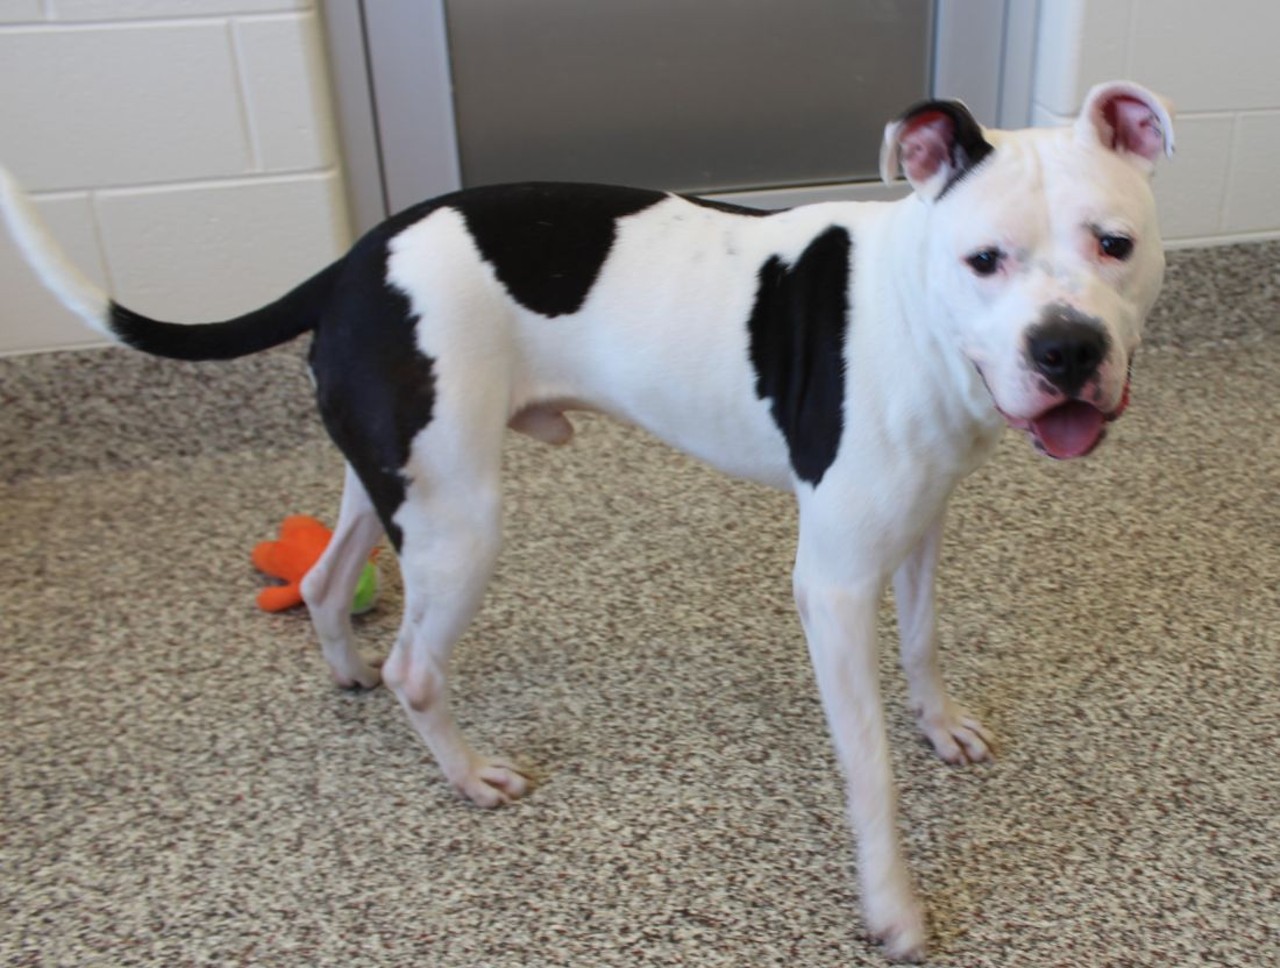 NAME: Riley
GENDER: Male
BREED: Staffordshire Bull Terrier
AGE: 1 year
WEIGHT: 66 pounds
SPECIAL CONSIDERATIONS: Prefers a home with older children
REASON I CAME TO MHS: Owner surrender
LOCATION: Mackey Center for Animal Care in Detroit
ID NUMBER: 868059